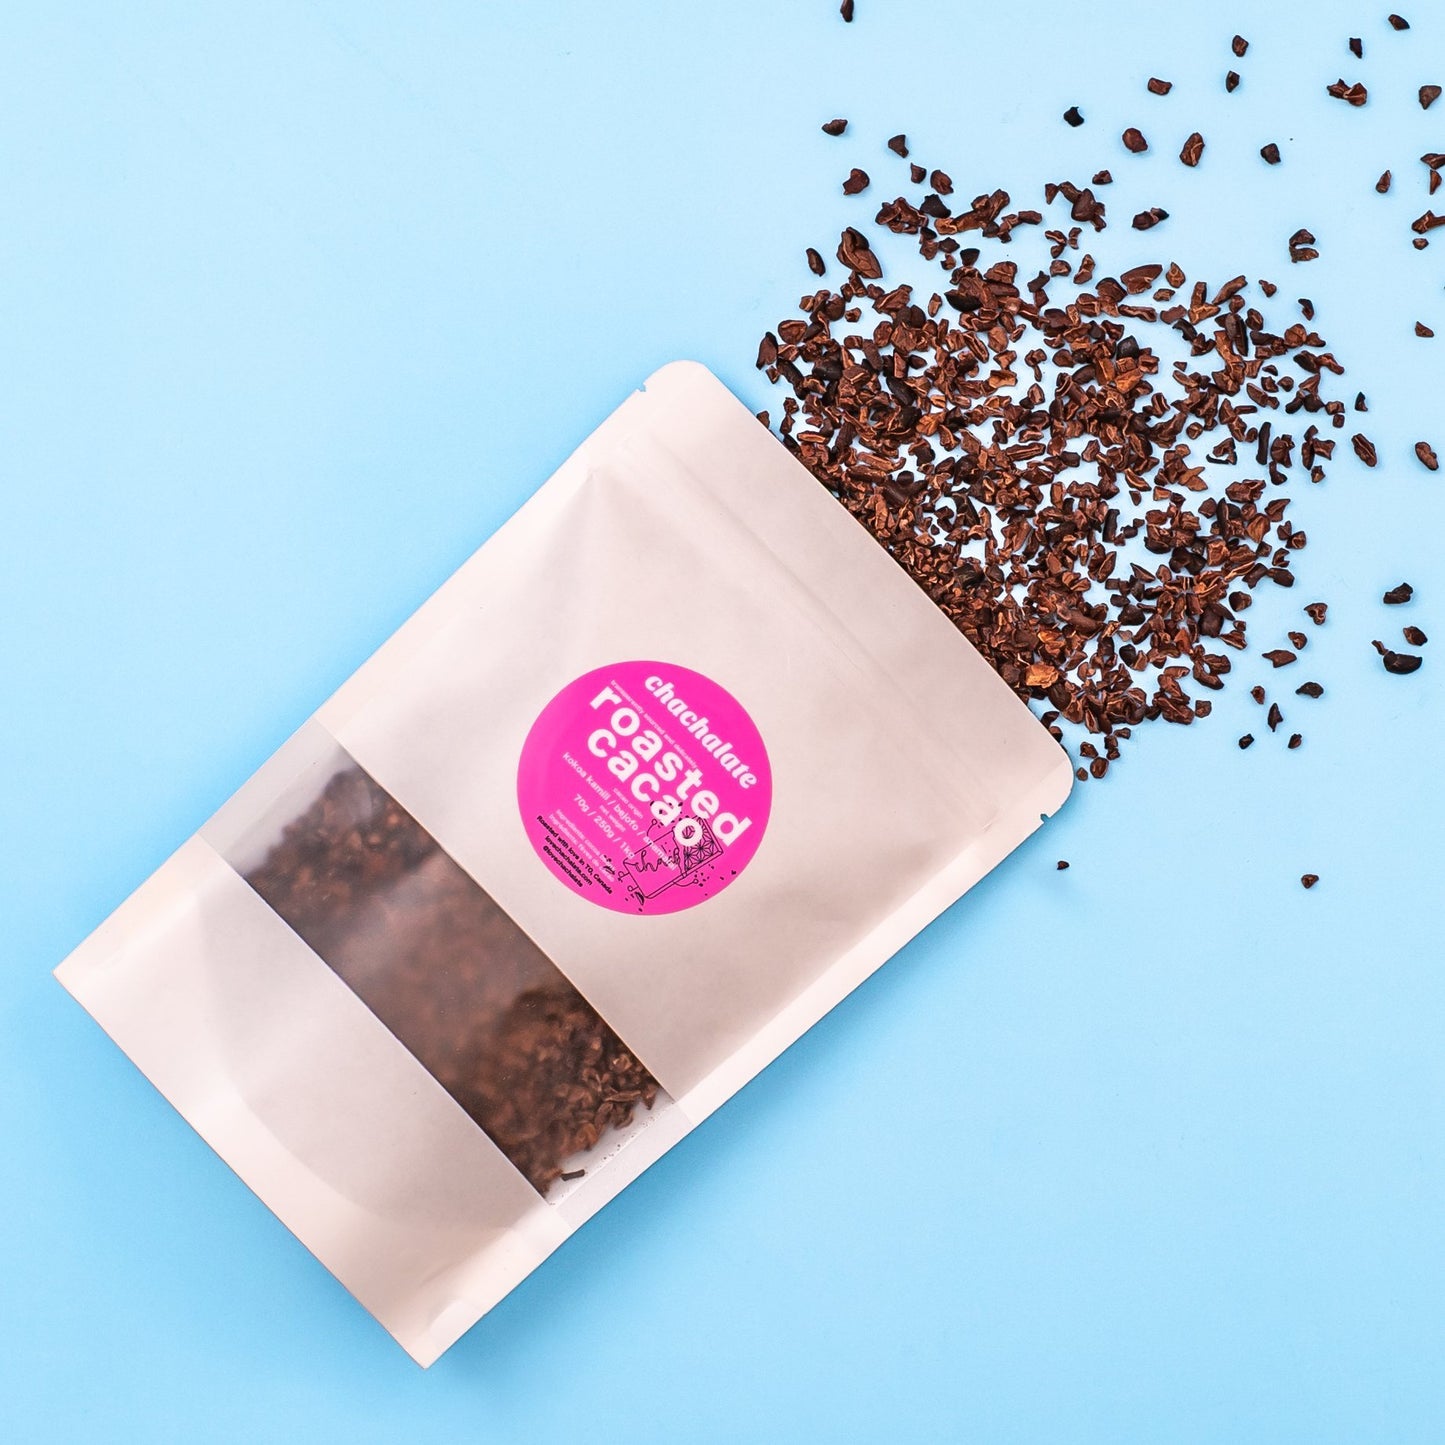 roasted chachalate cacao nibs - chachalate